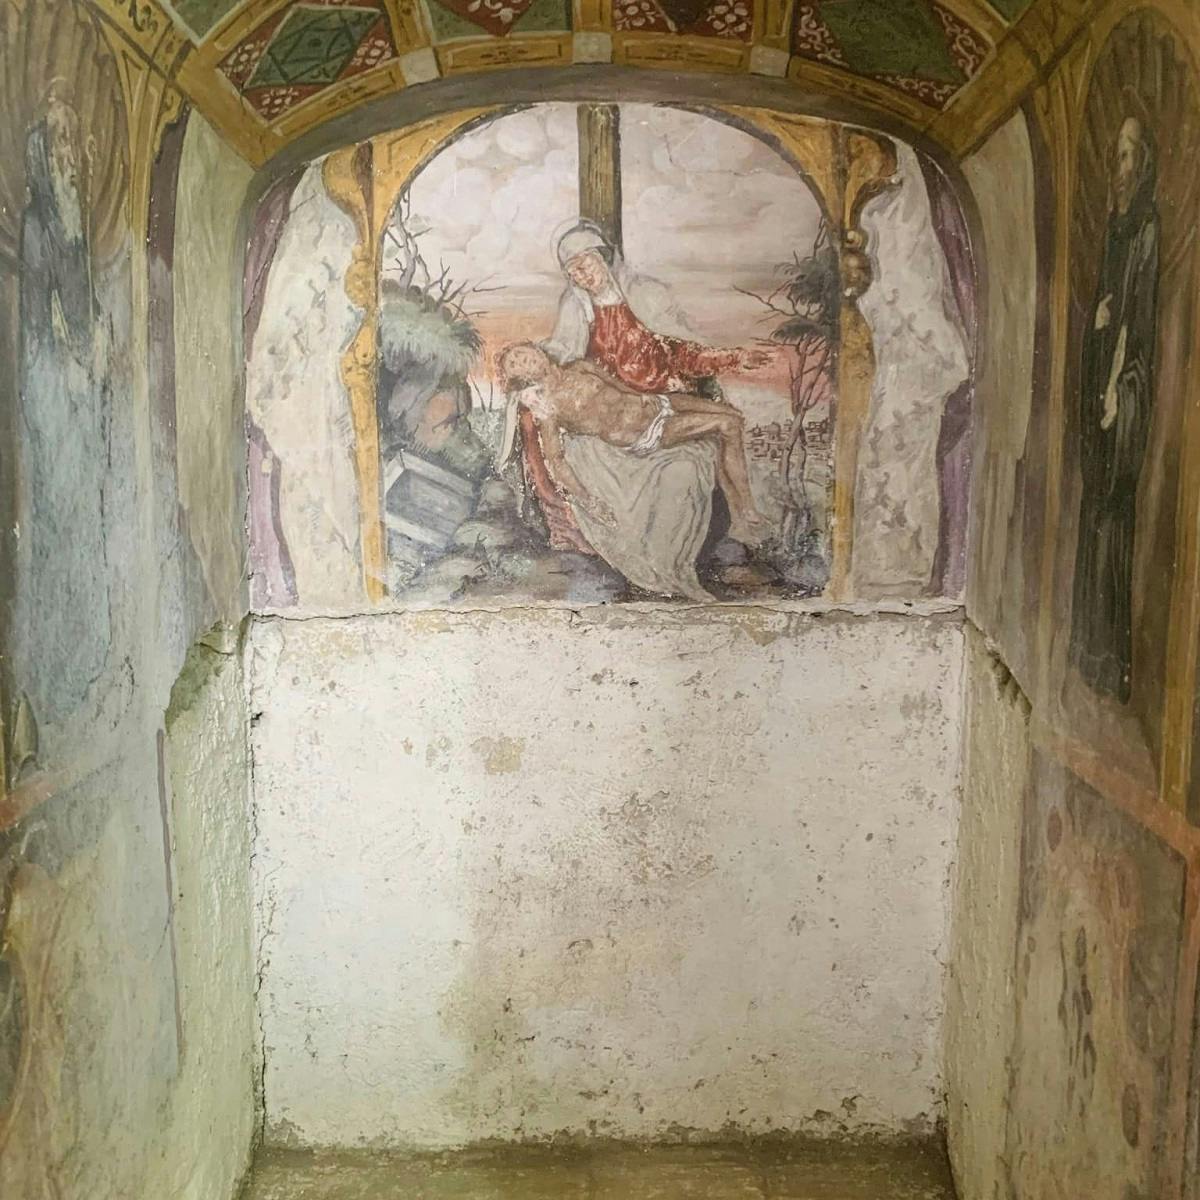 A 16th-century chapel was found beneath a wall in Naples